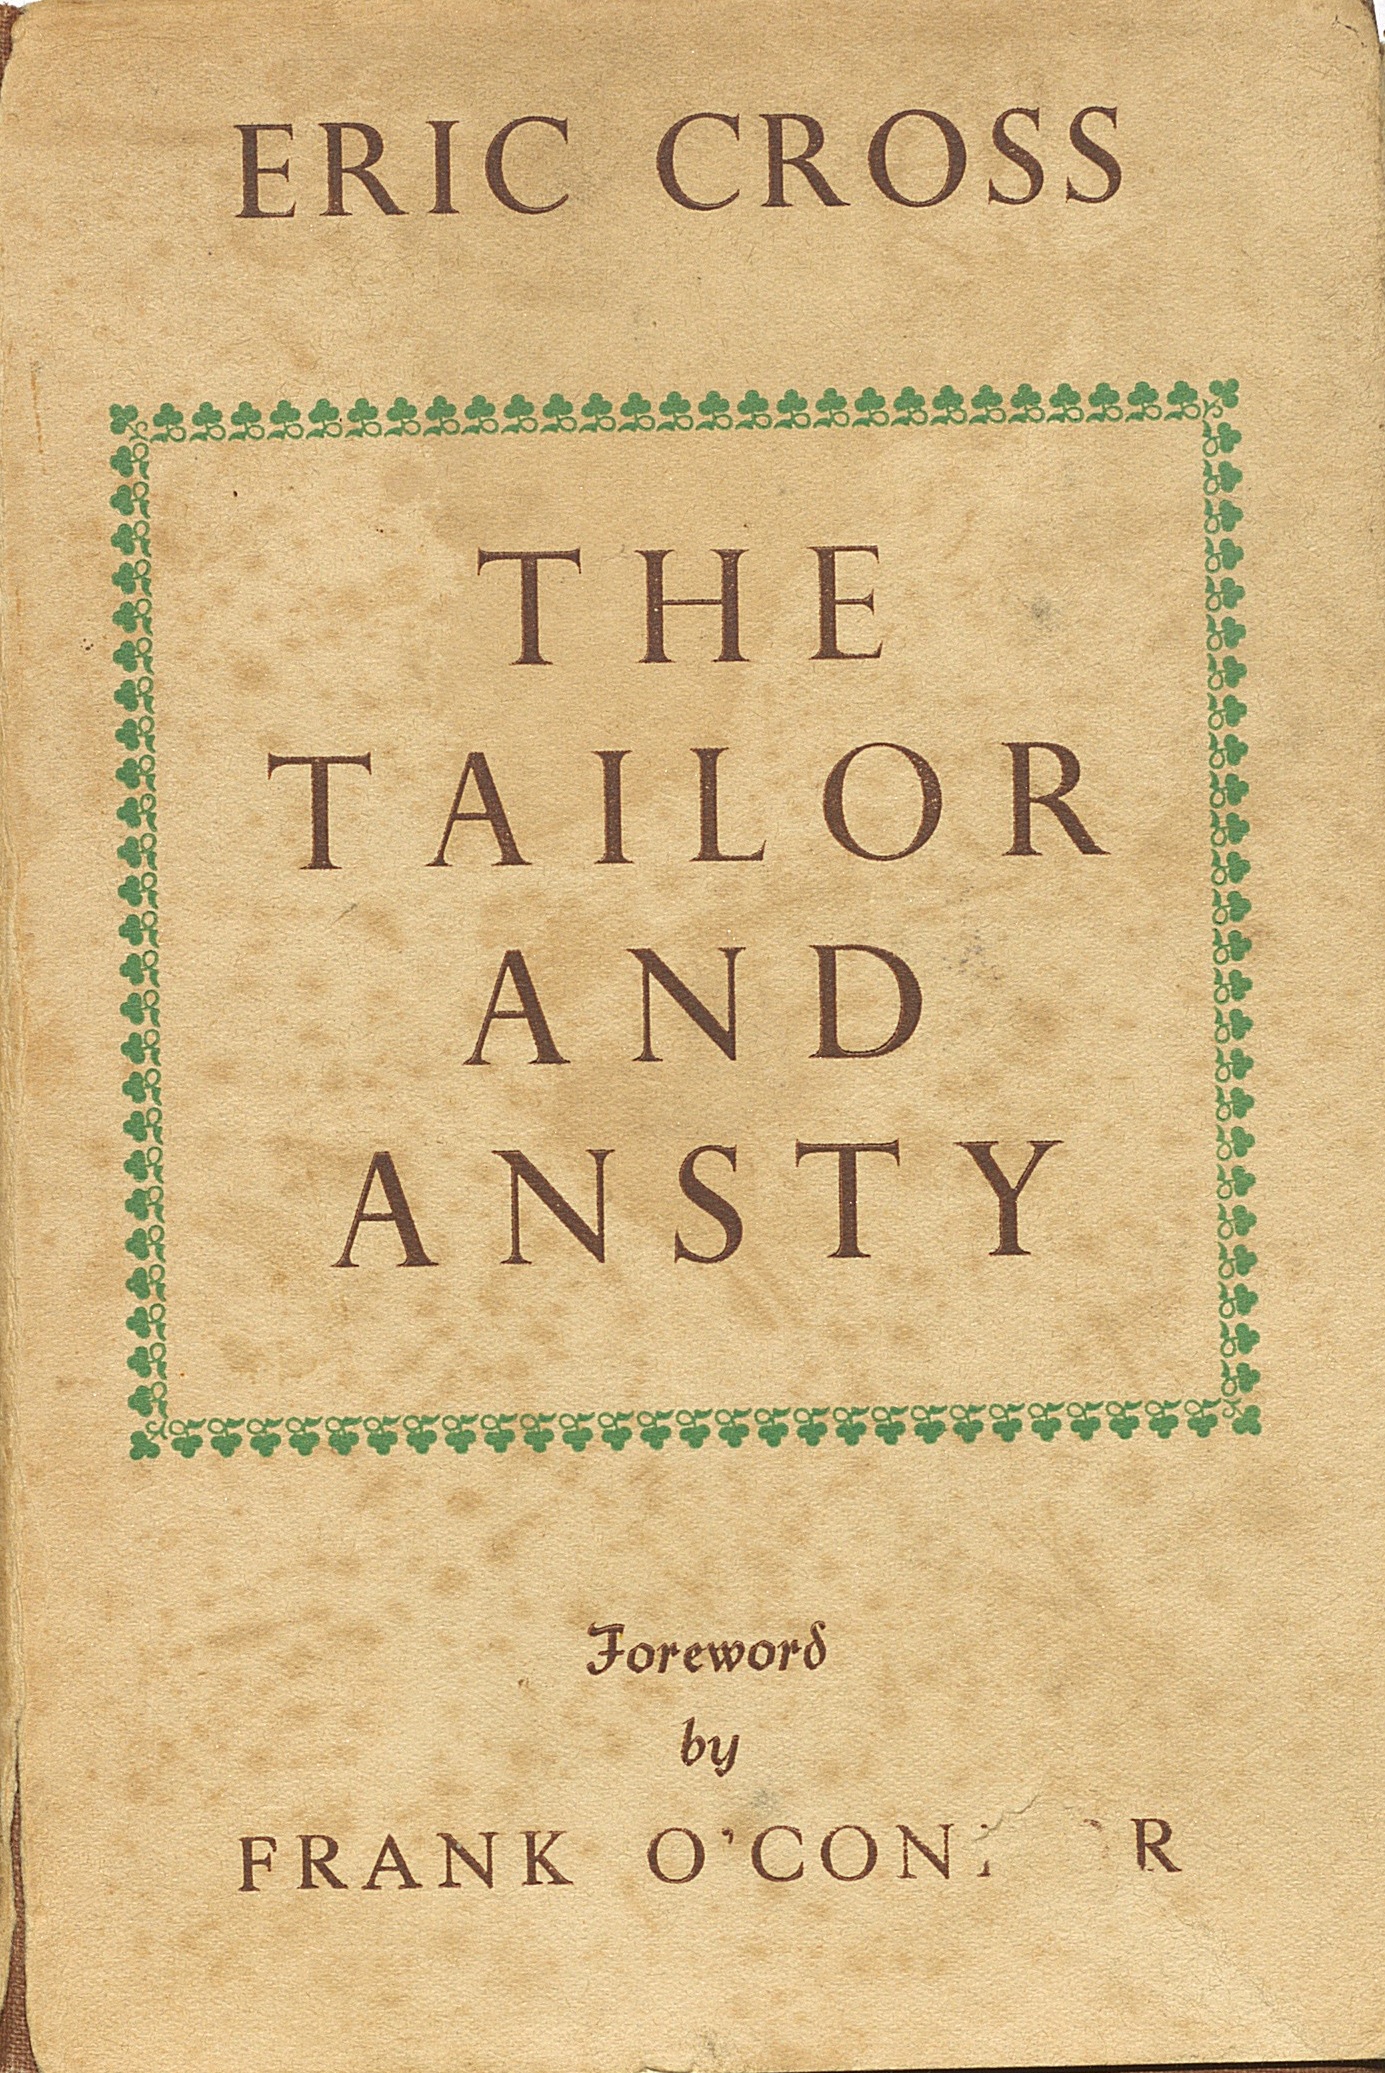 Front cover to the 1942 publication of The Tailor and Ansty. The cover is beige with a green design around the title. 